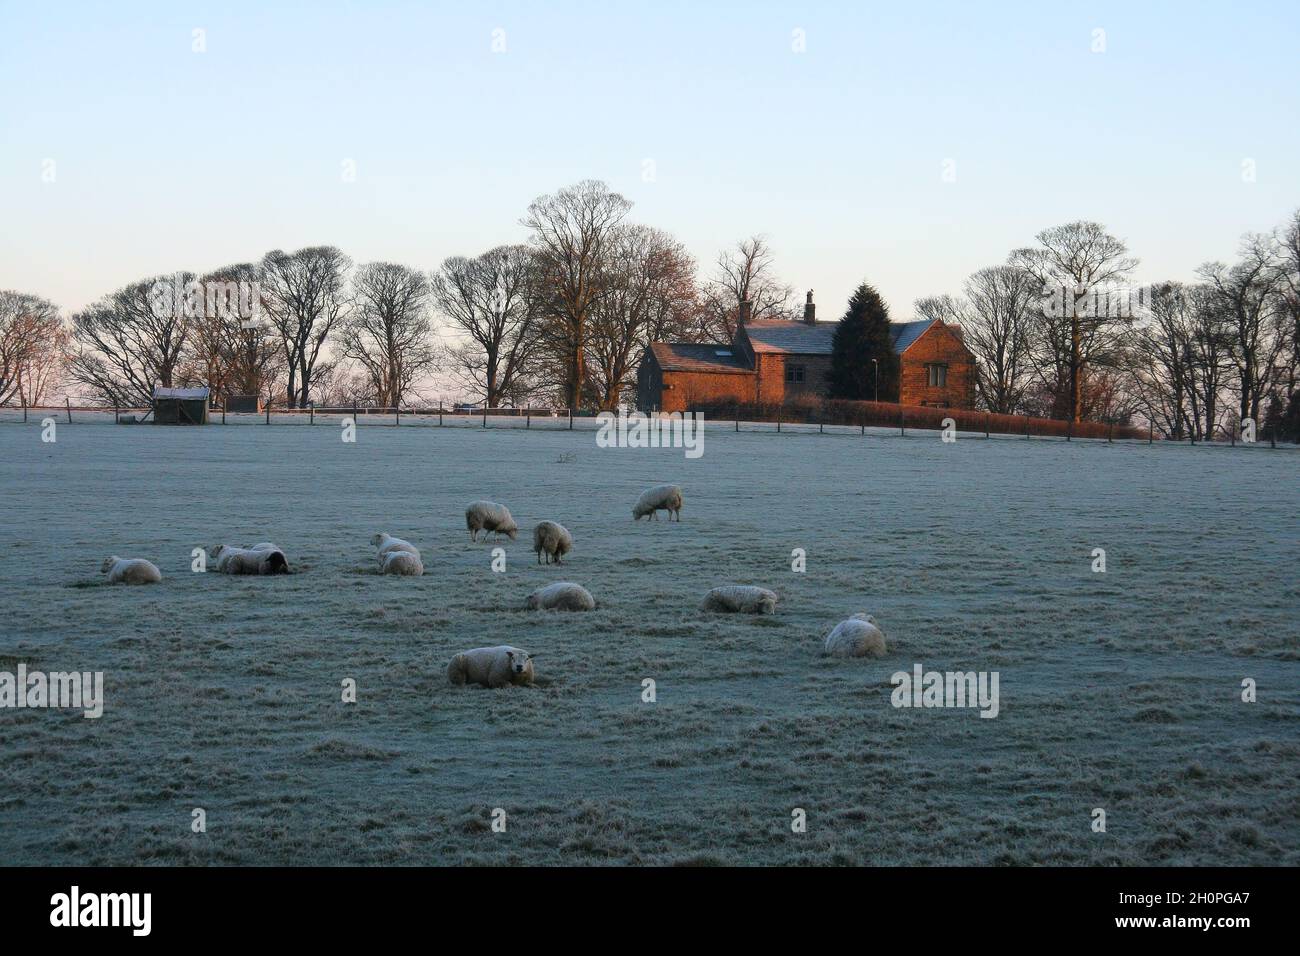 Sheep in a frost covered field and a farmhouse glowing orange soon after sunrise at Kelbrook and Sough, Lancashire, England Stock Photo